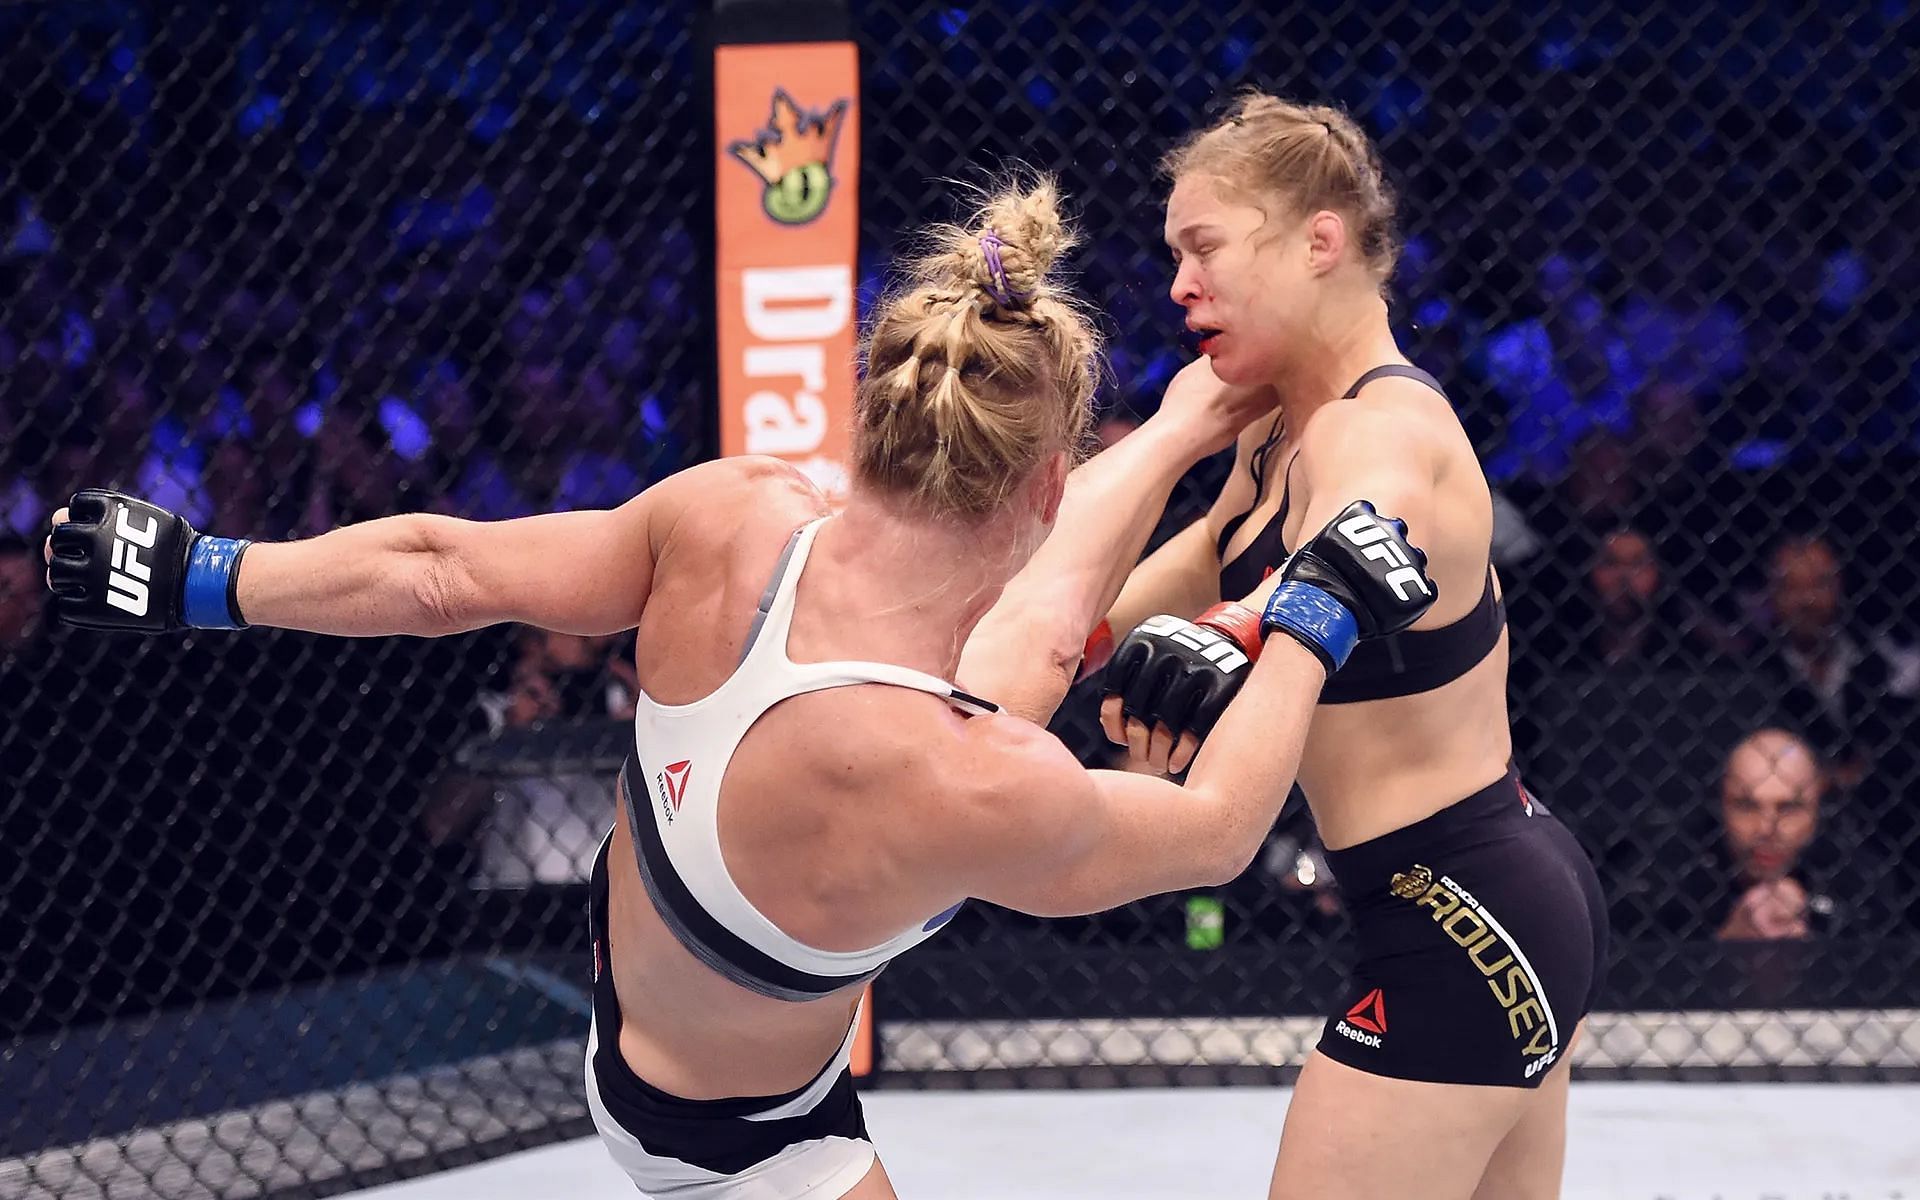 Despite their first bout being part of UFC legend, Holly Holm and Ronda Rousey never did rematch